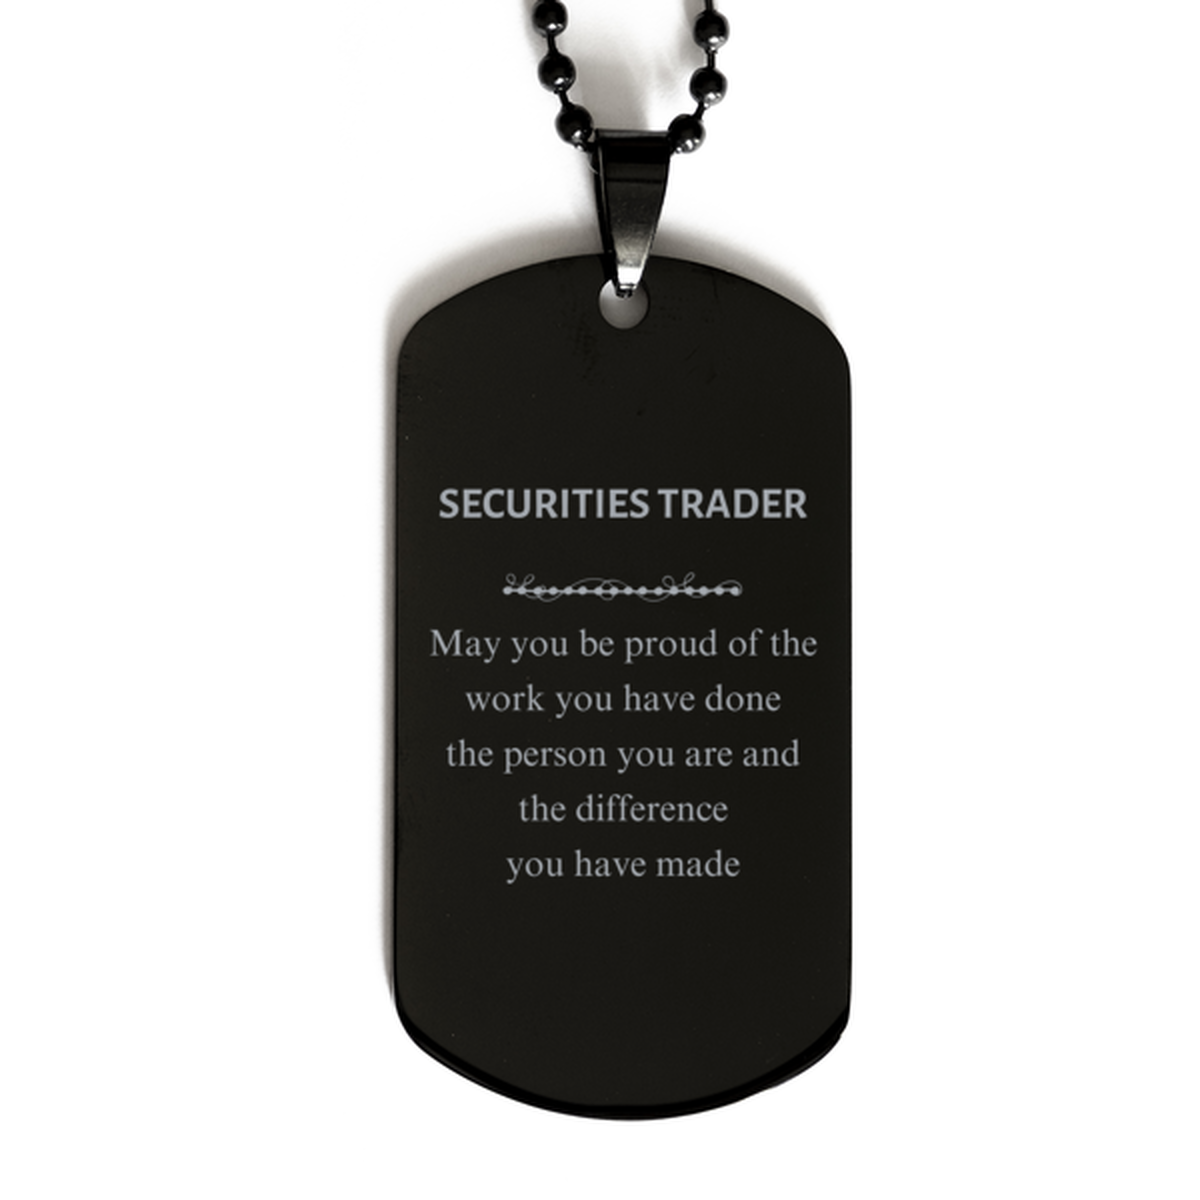 Securities Trader May you be proud of the work you have done, Retirement Securities Trader Black Dog Tag for Colleague Appreciation Gifts Amazing for Securities Trader